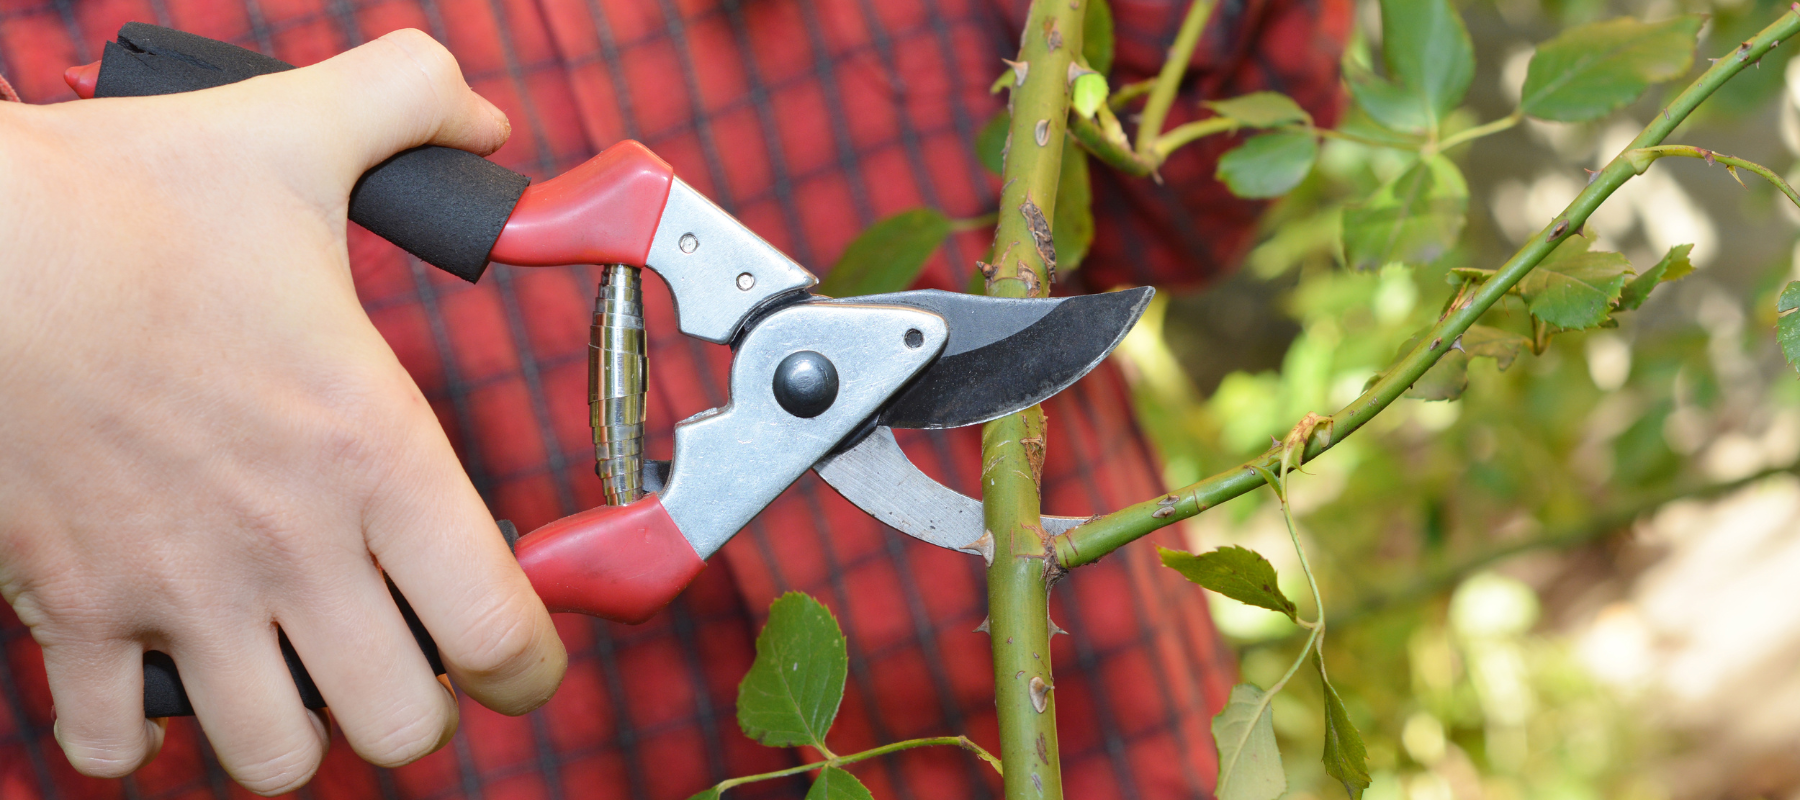 How to prune roses in winter